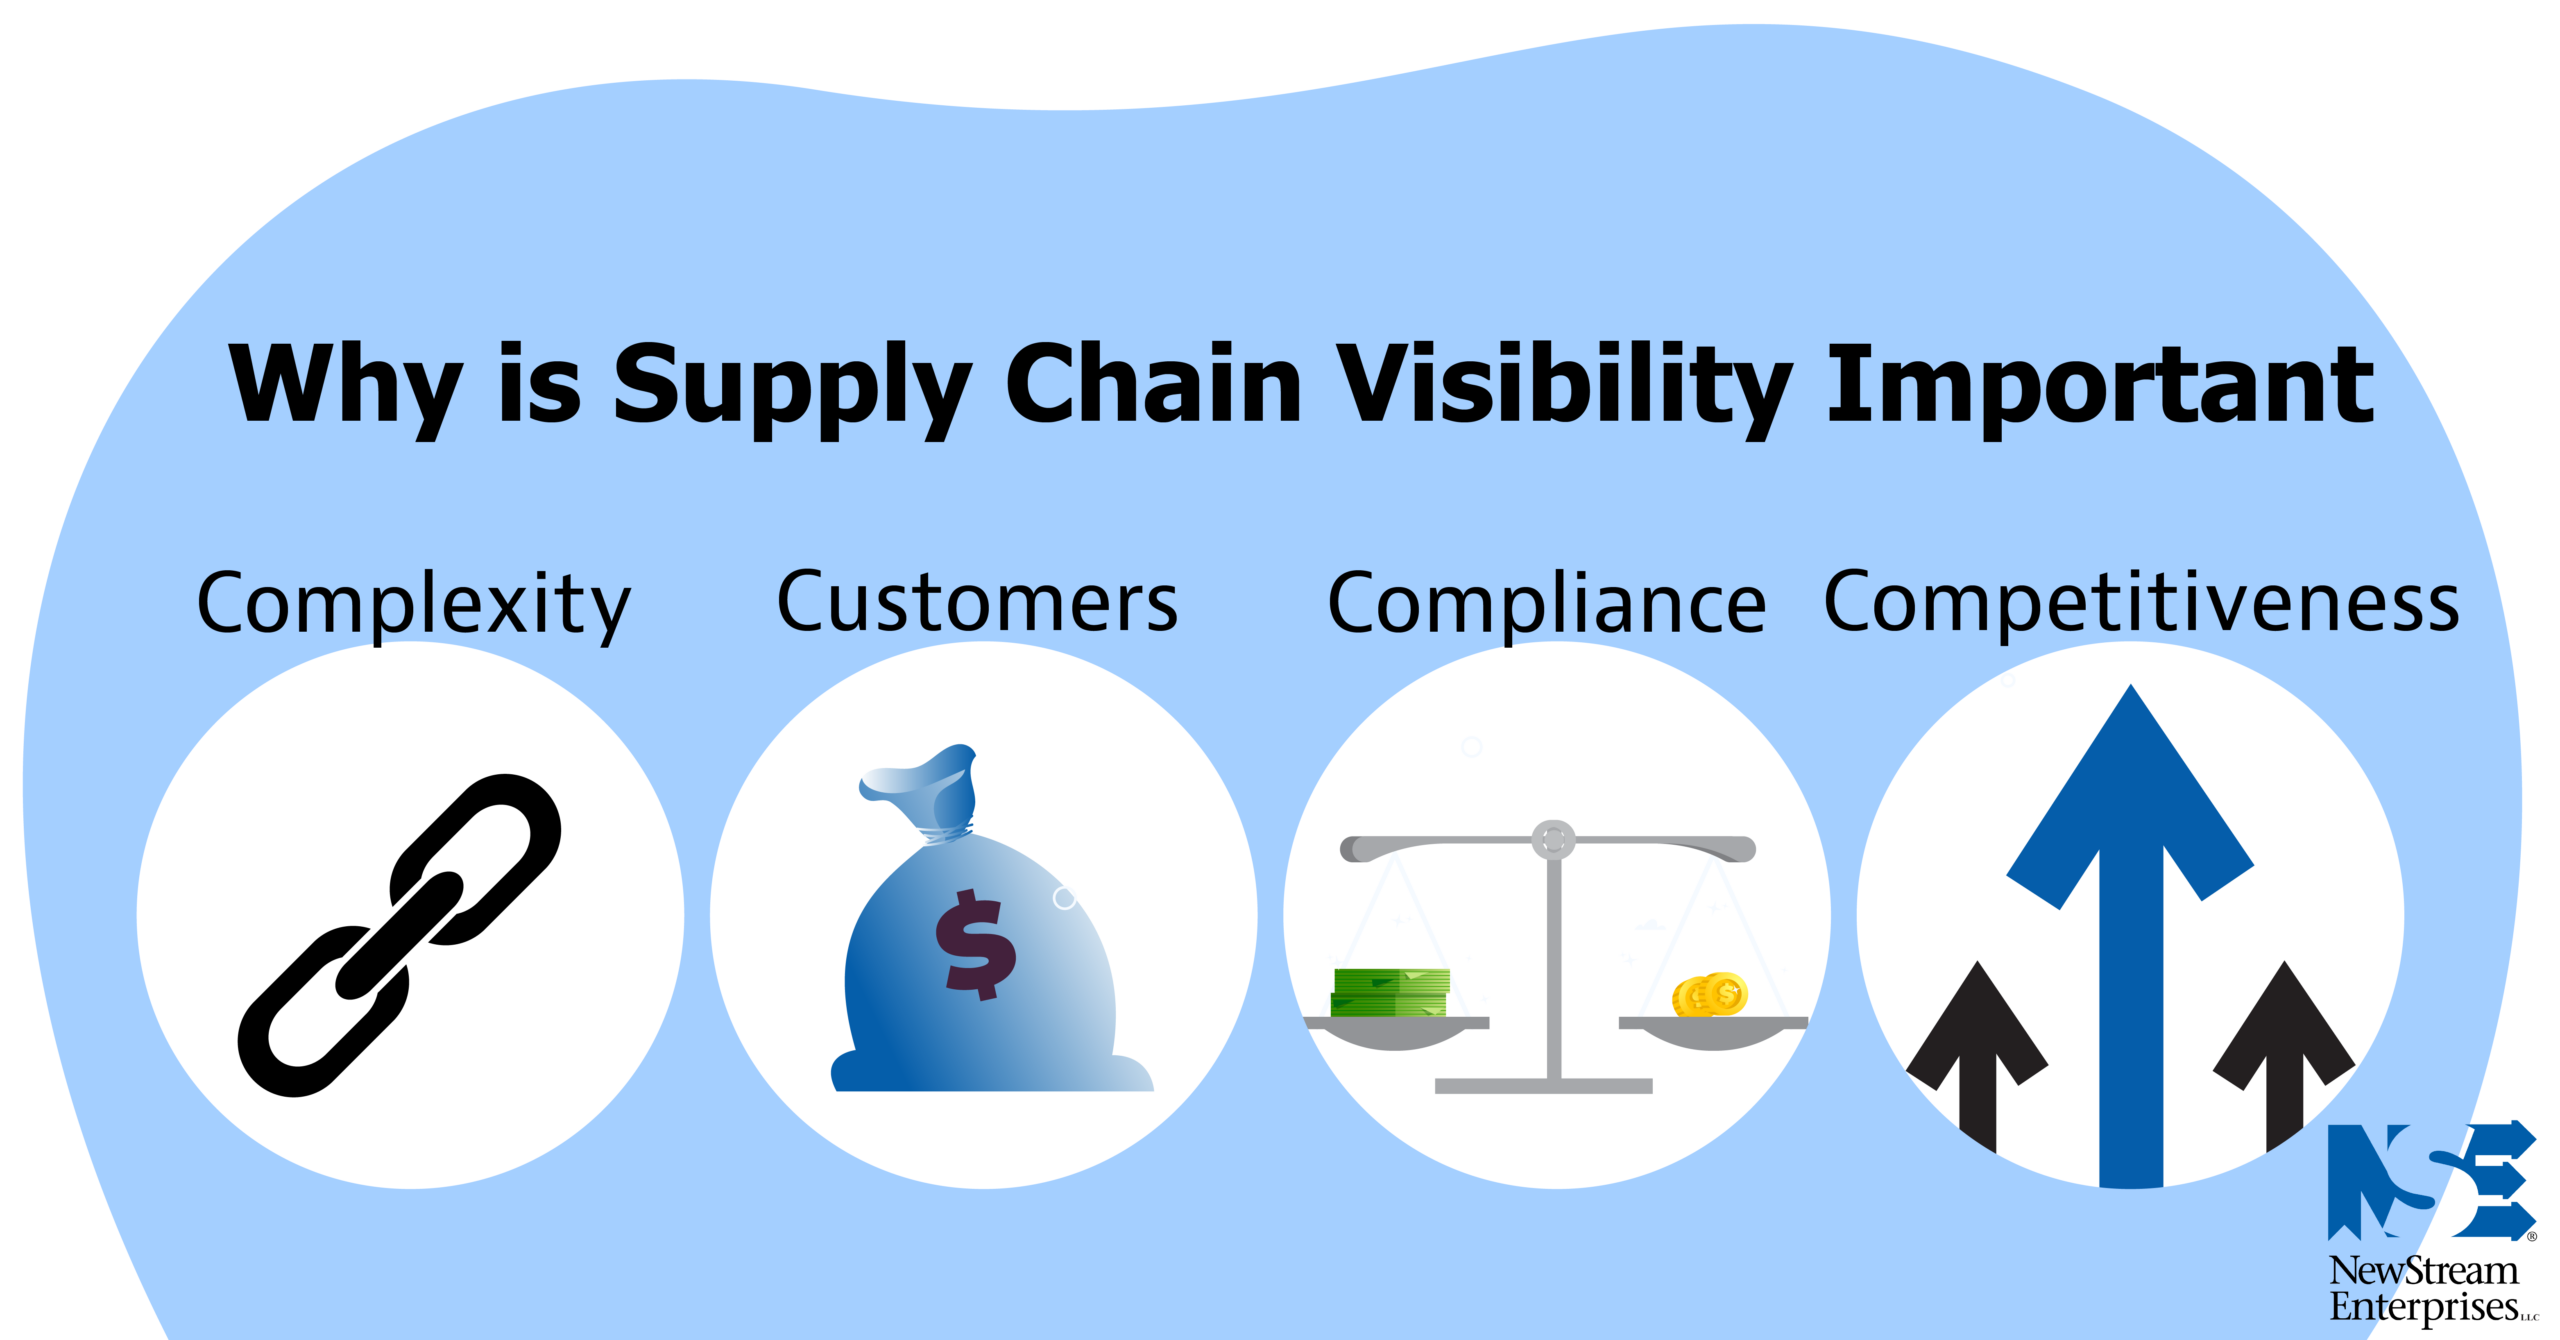 Why is Supply Chain Visibility Important